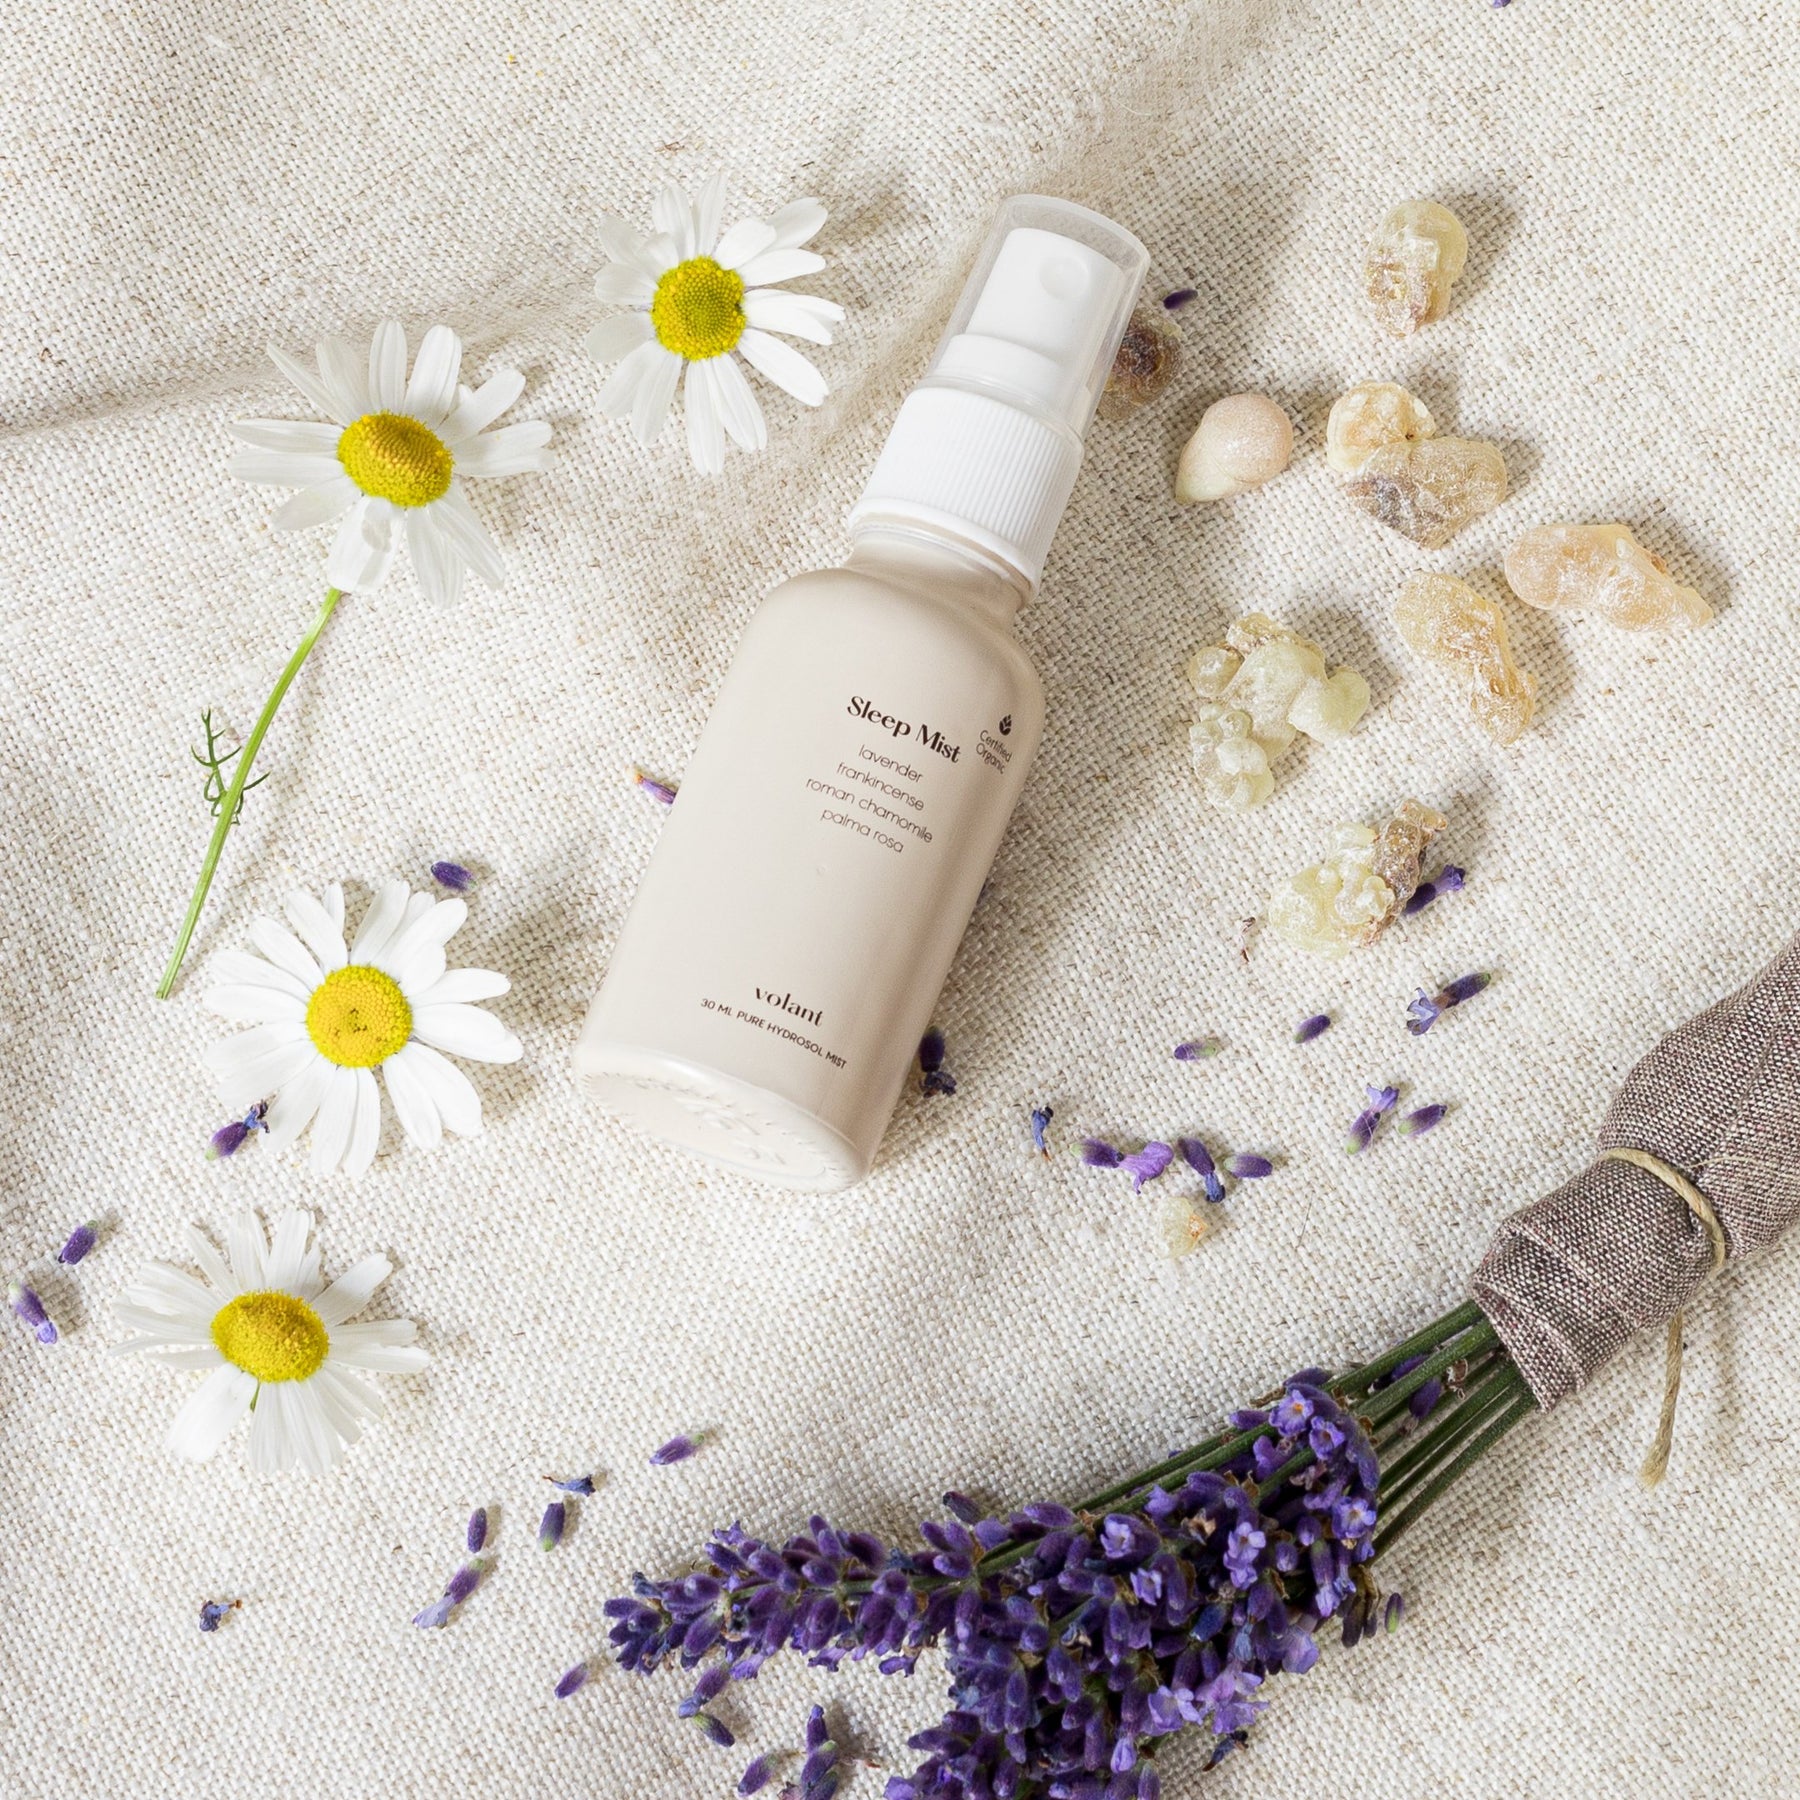 volant sleep mist bottle. Blended from the essential oils; lavender, palma rosa, chamomile and frankinscense. Spray it directly onto your face or pillow before bedtime to ensure a good night's sleep. Spray it directly onto your face or pillow before bedtime to ensure a good night's sleep.